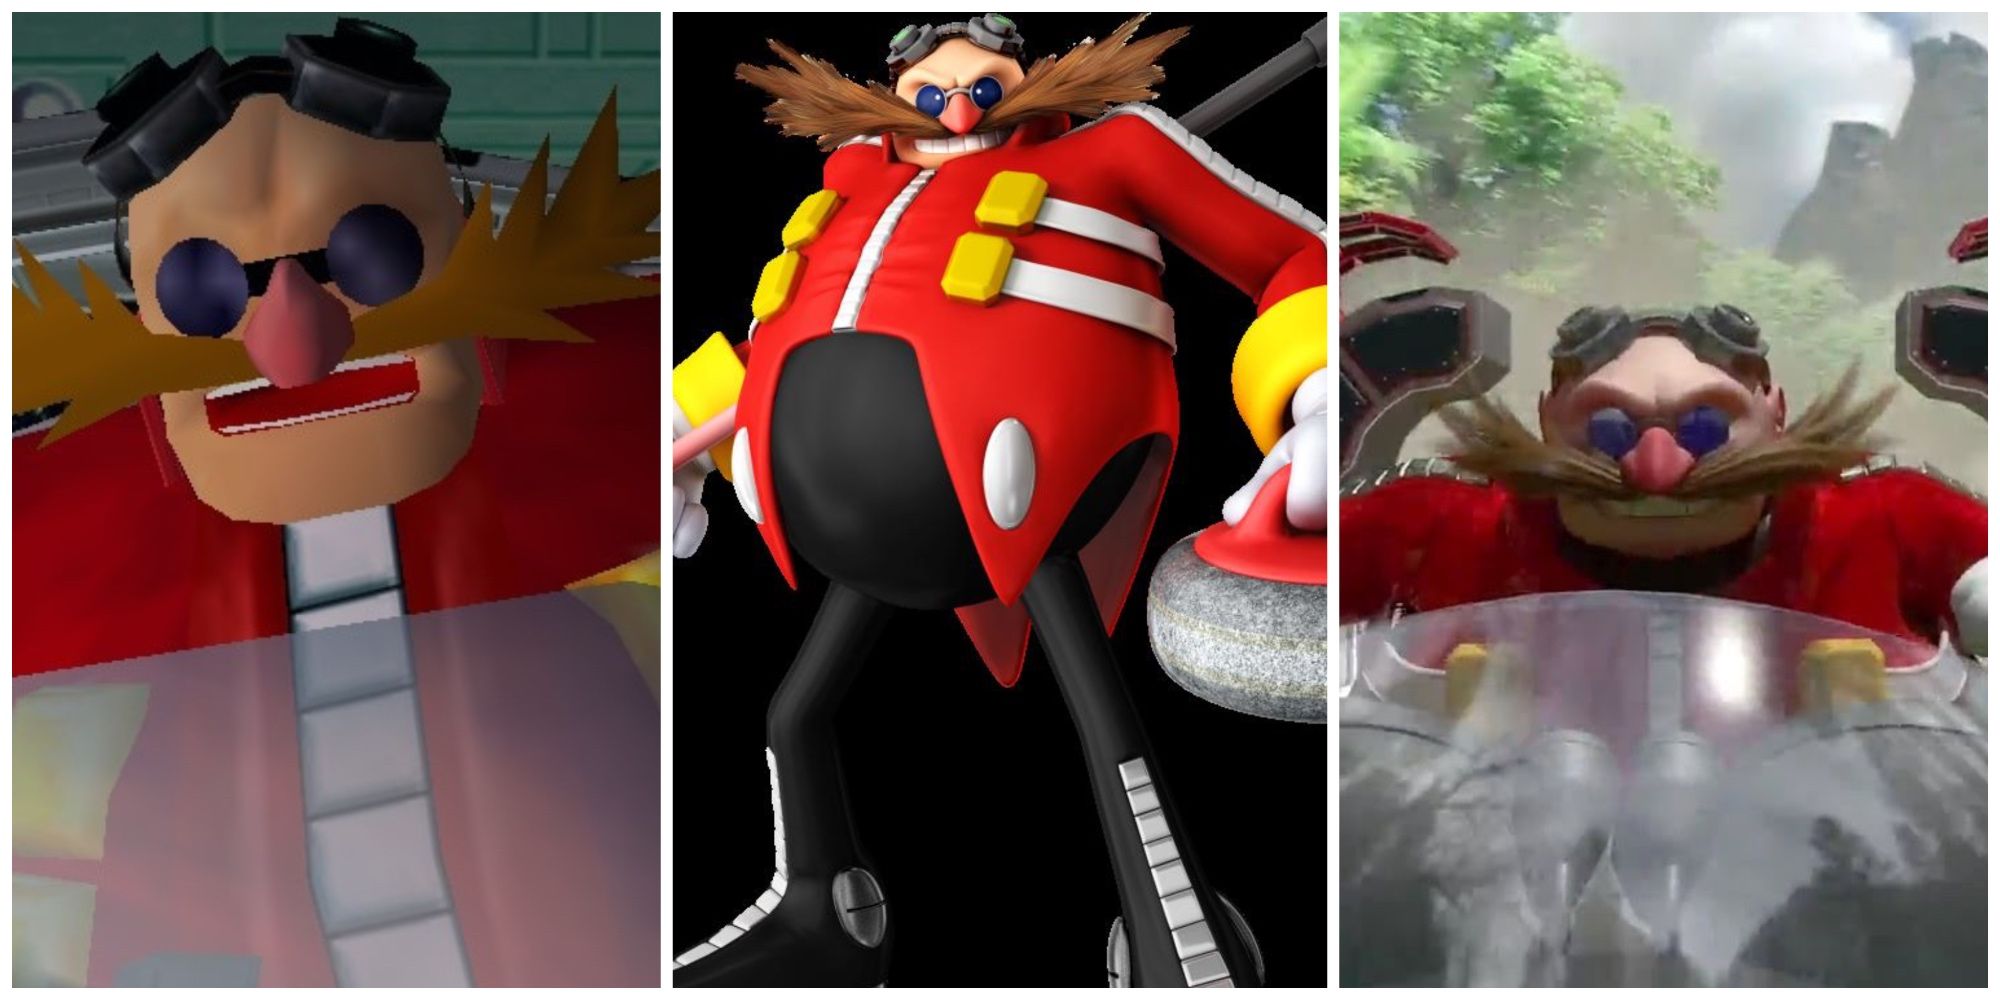 Eggman as a playable character in sonic adventure 2, olympics series and racing series